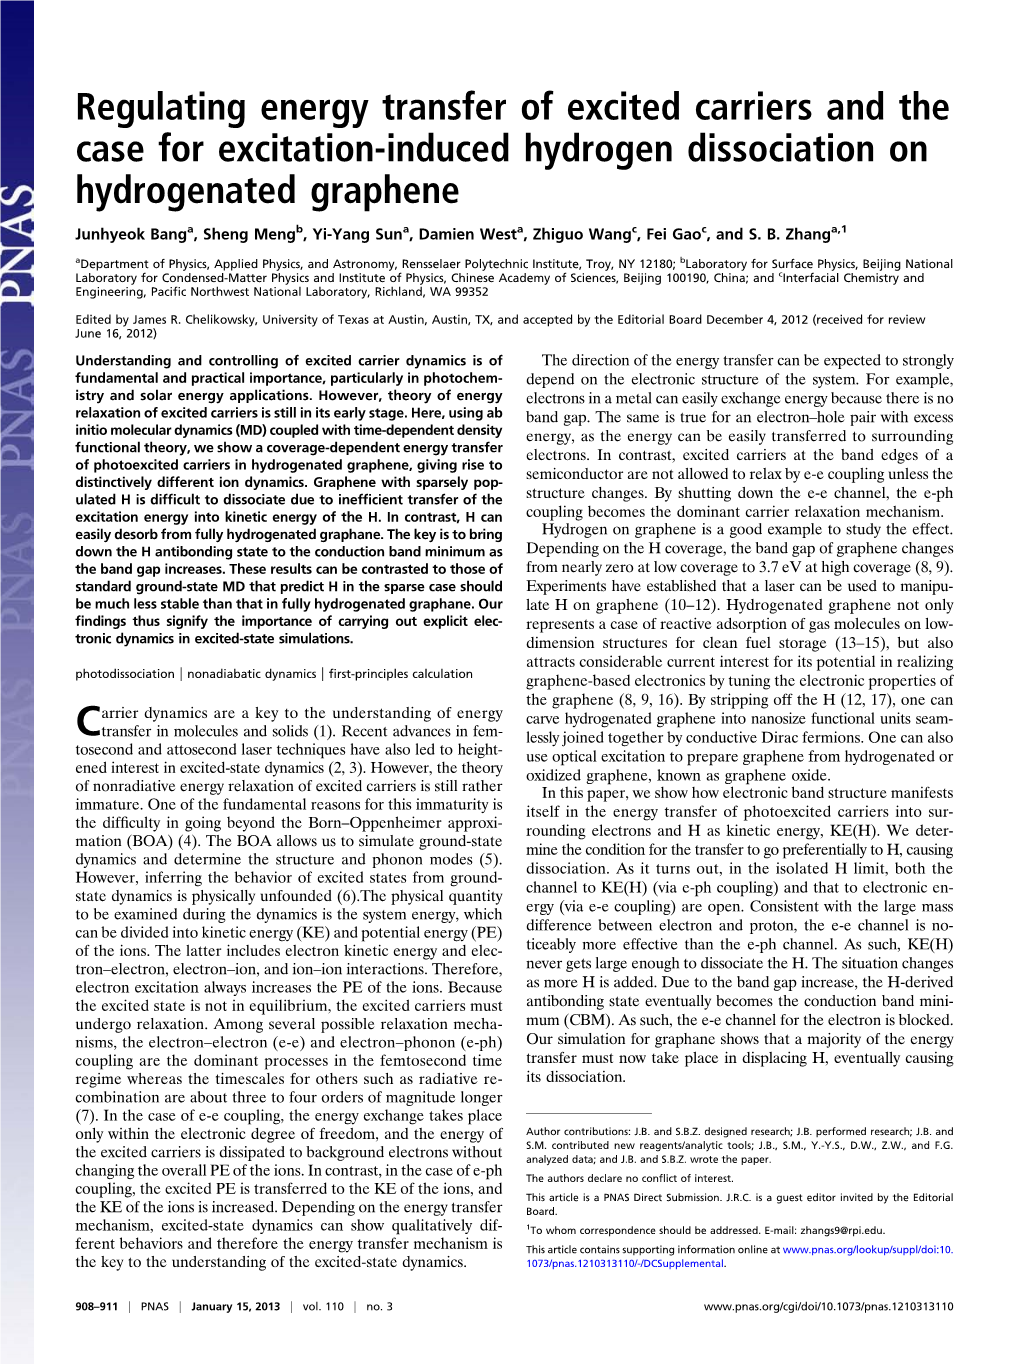 Regulating Energy Transfer of Excited Carriers and the Case for Excitation-Induced Hydrogen Dissociation on Hydrogenated Graphene